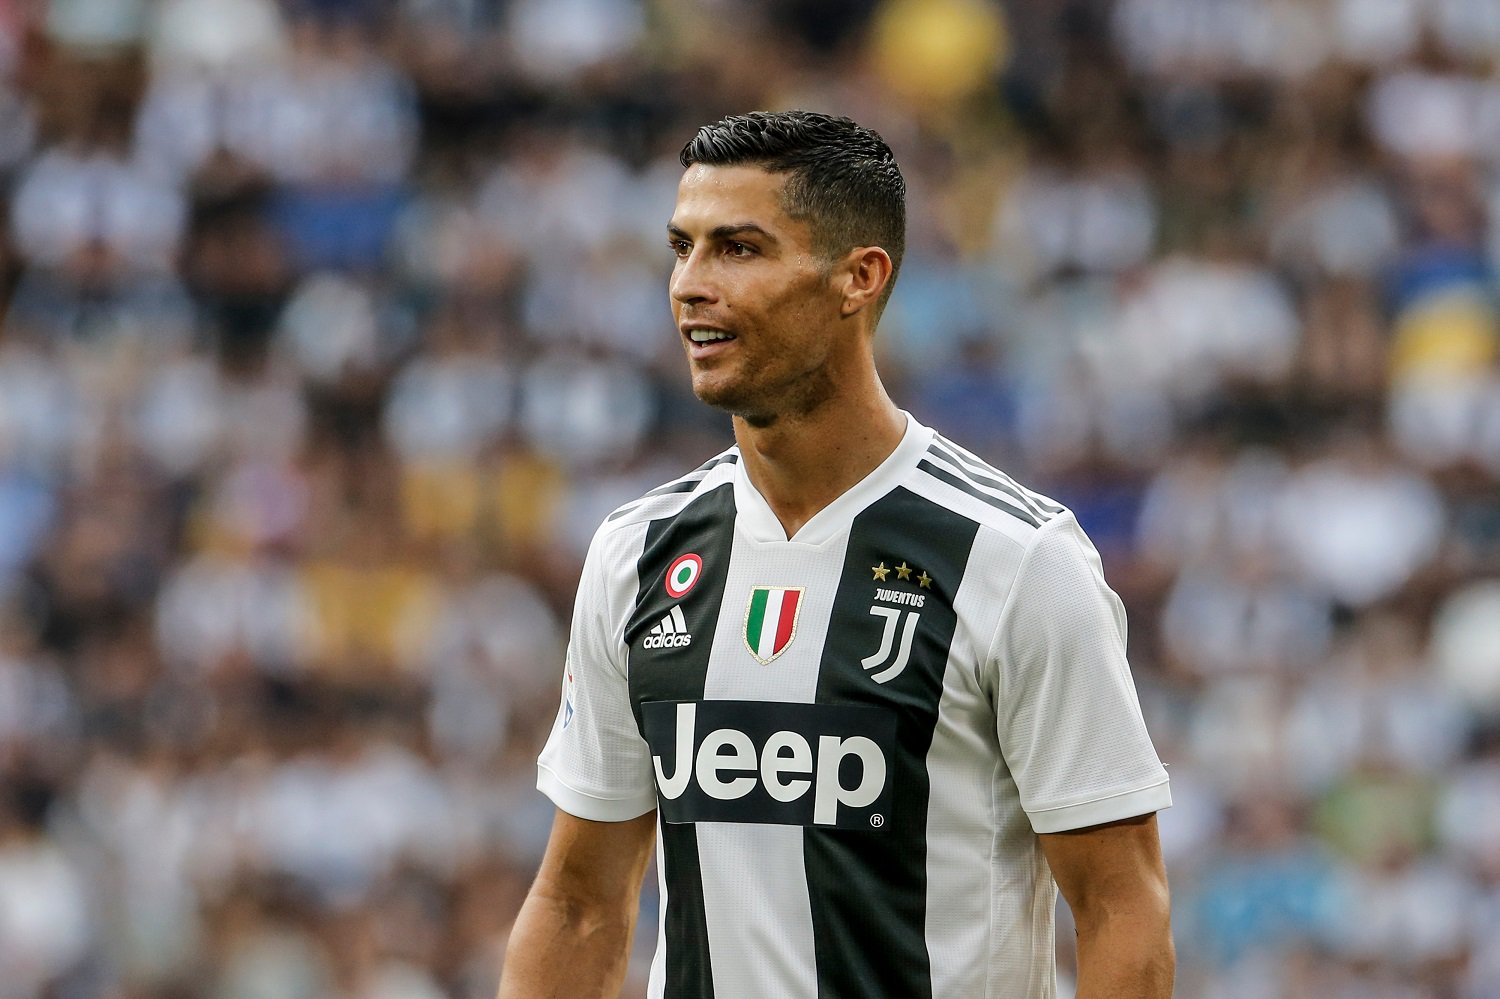 Juventus Soccer Club Is Launching A Crypto Token To Give Fans A ‘Voice’